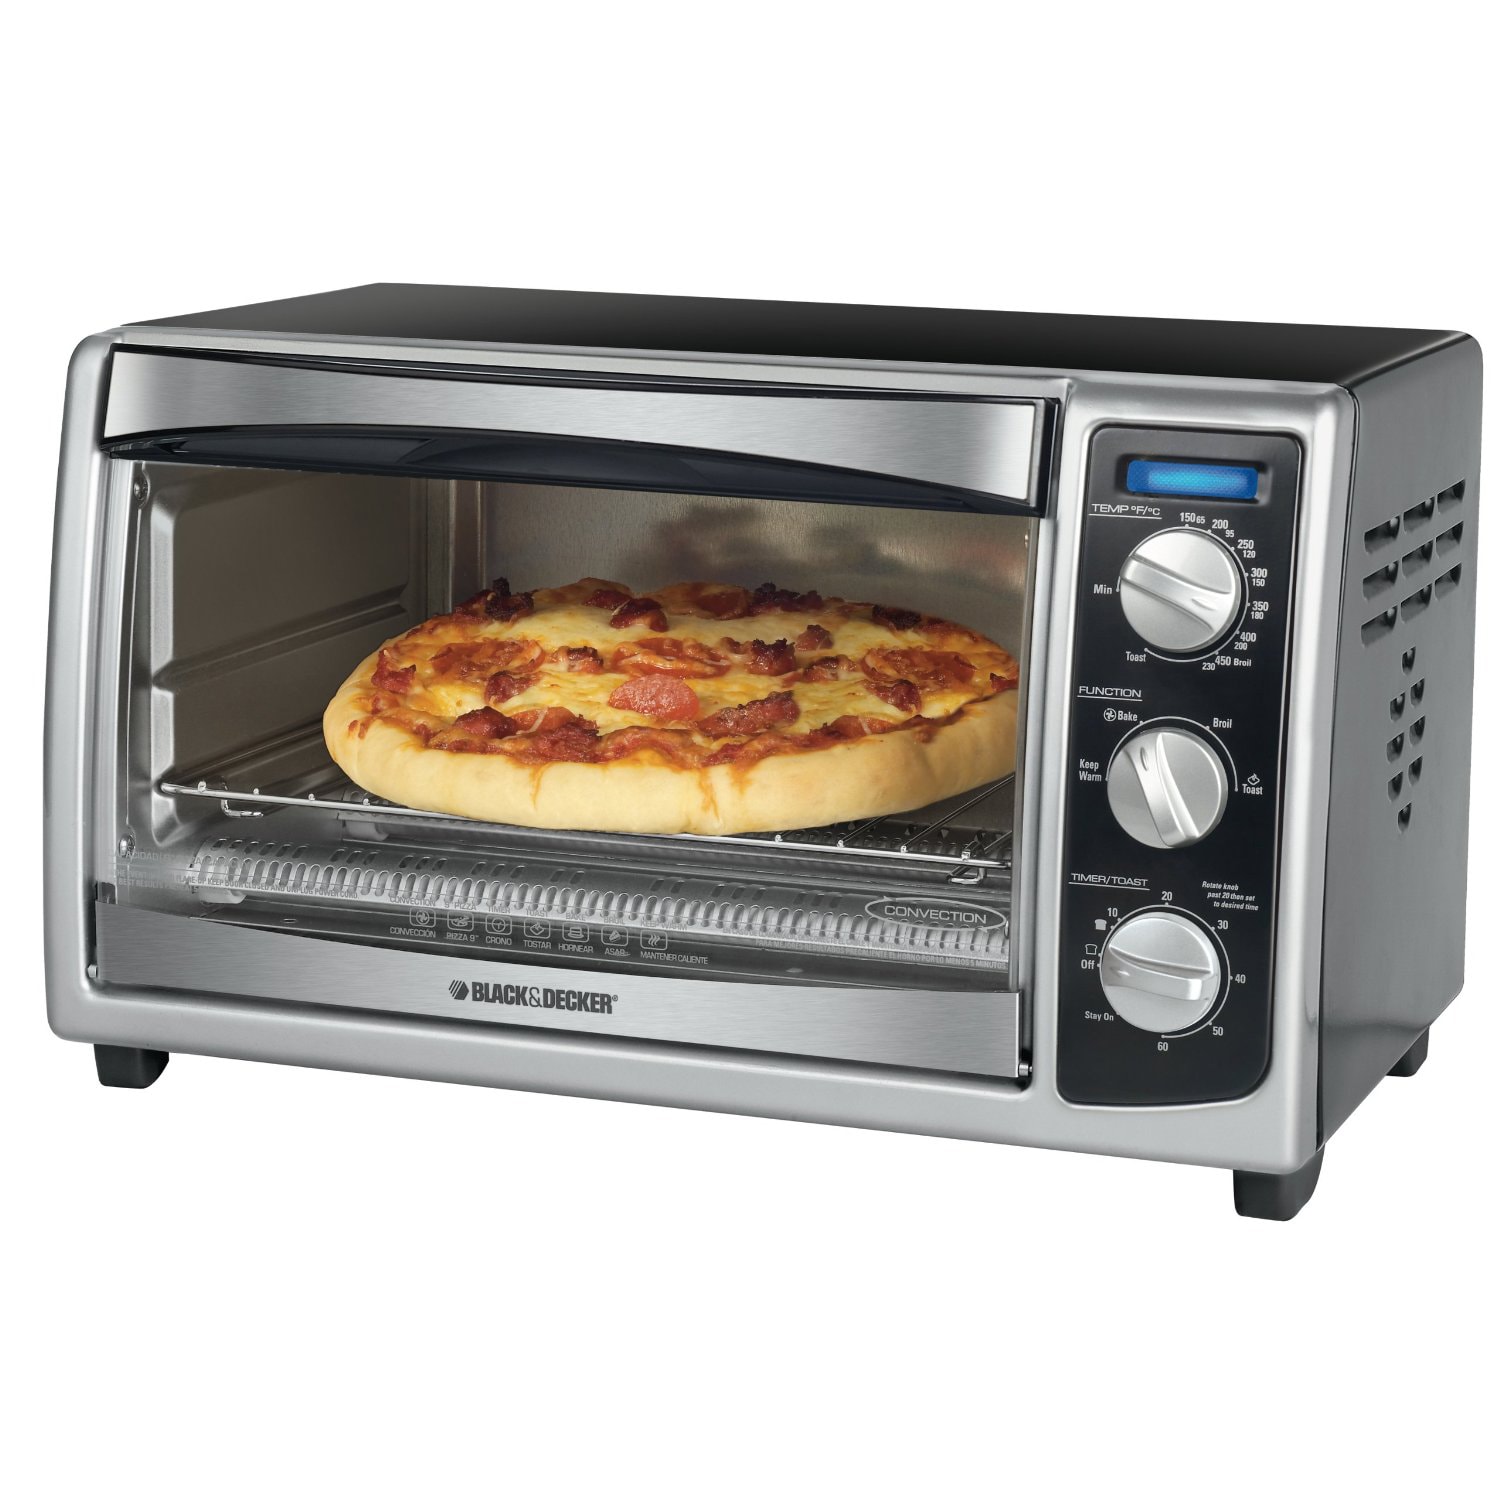 Black & Decker Stainless Steel Six-slice Toaster Oven - Bed Bath & Beyond -  6636079